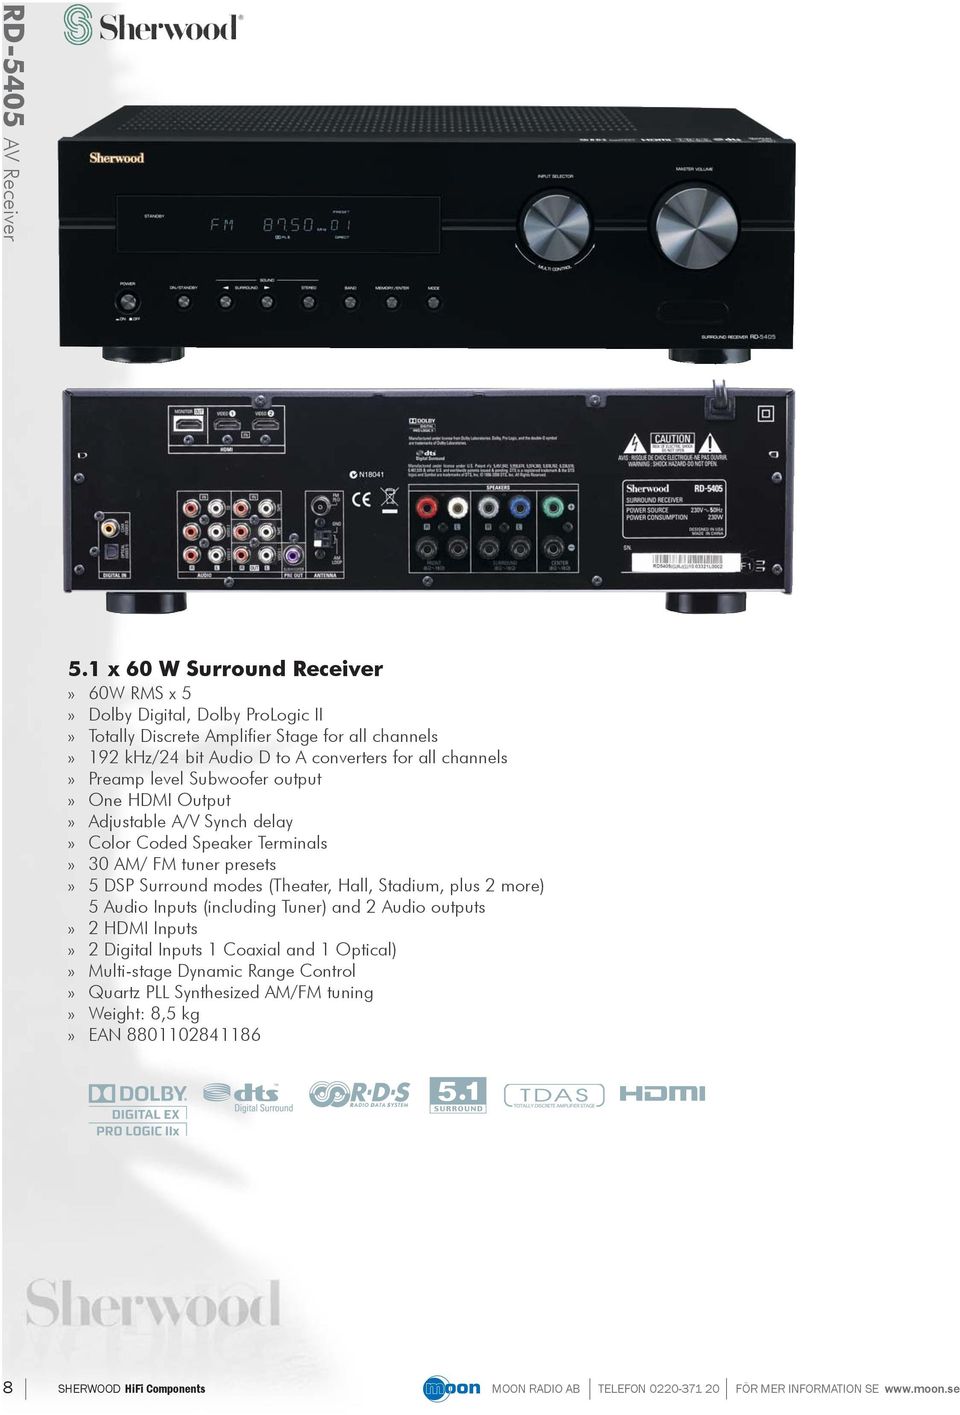 converters for all channels» Preamp level Subwoofer output» One HDMI Output» Adjustable A/V Synch delay» Color Coded Speaker Terminals» 30 AM/ FM tuner